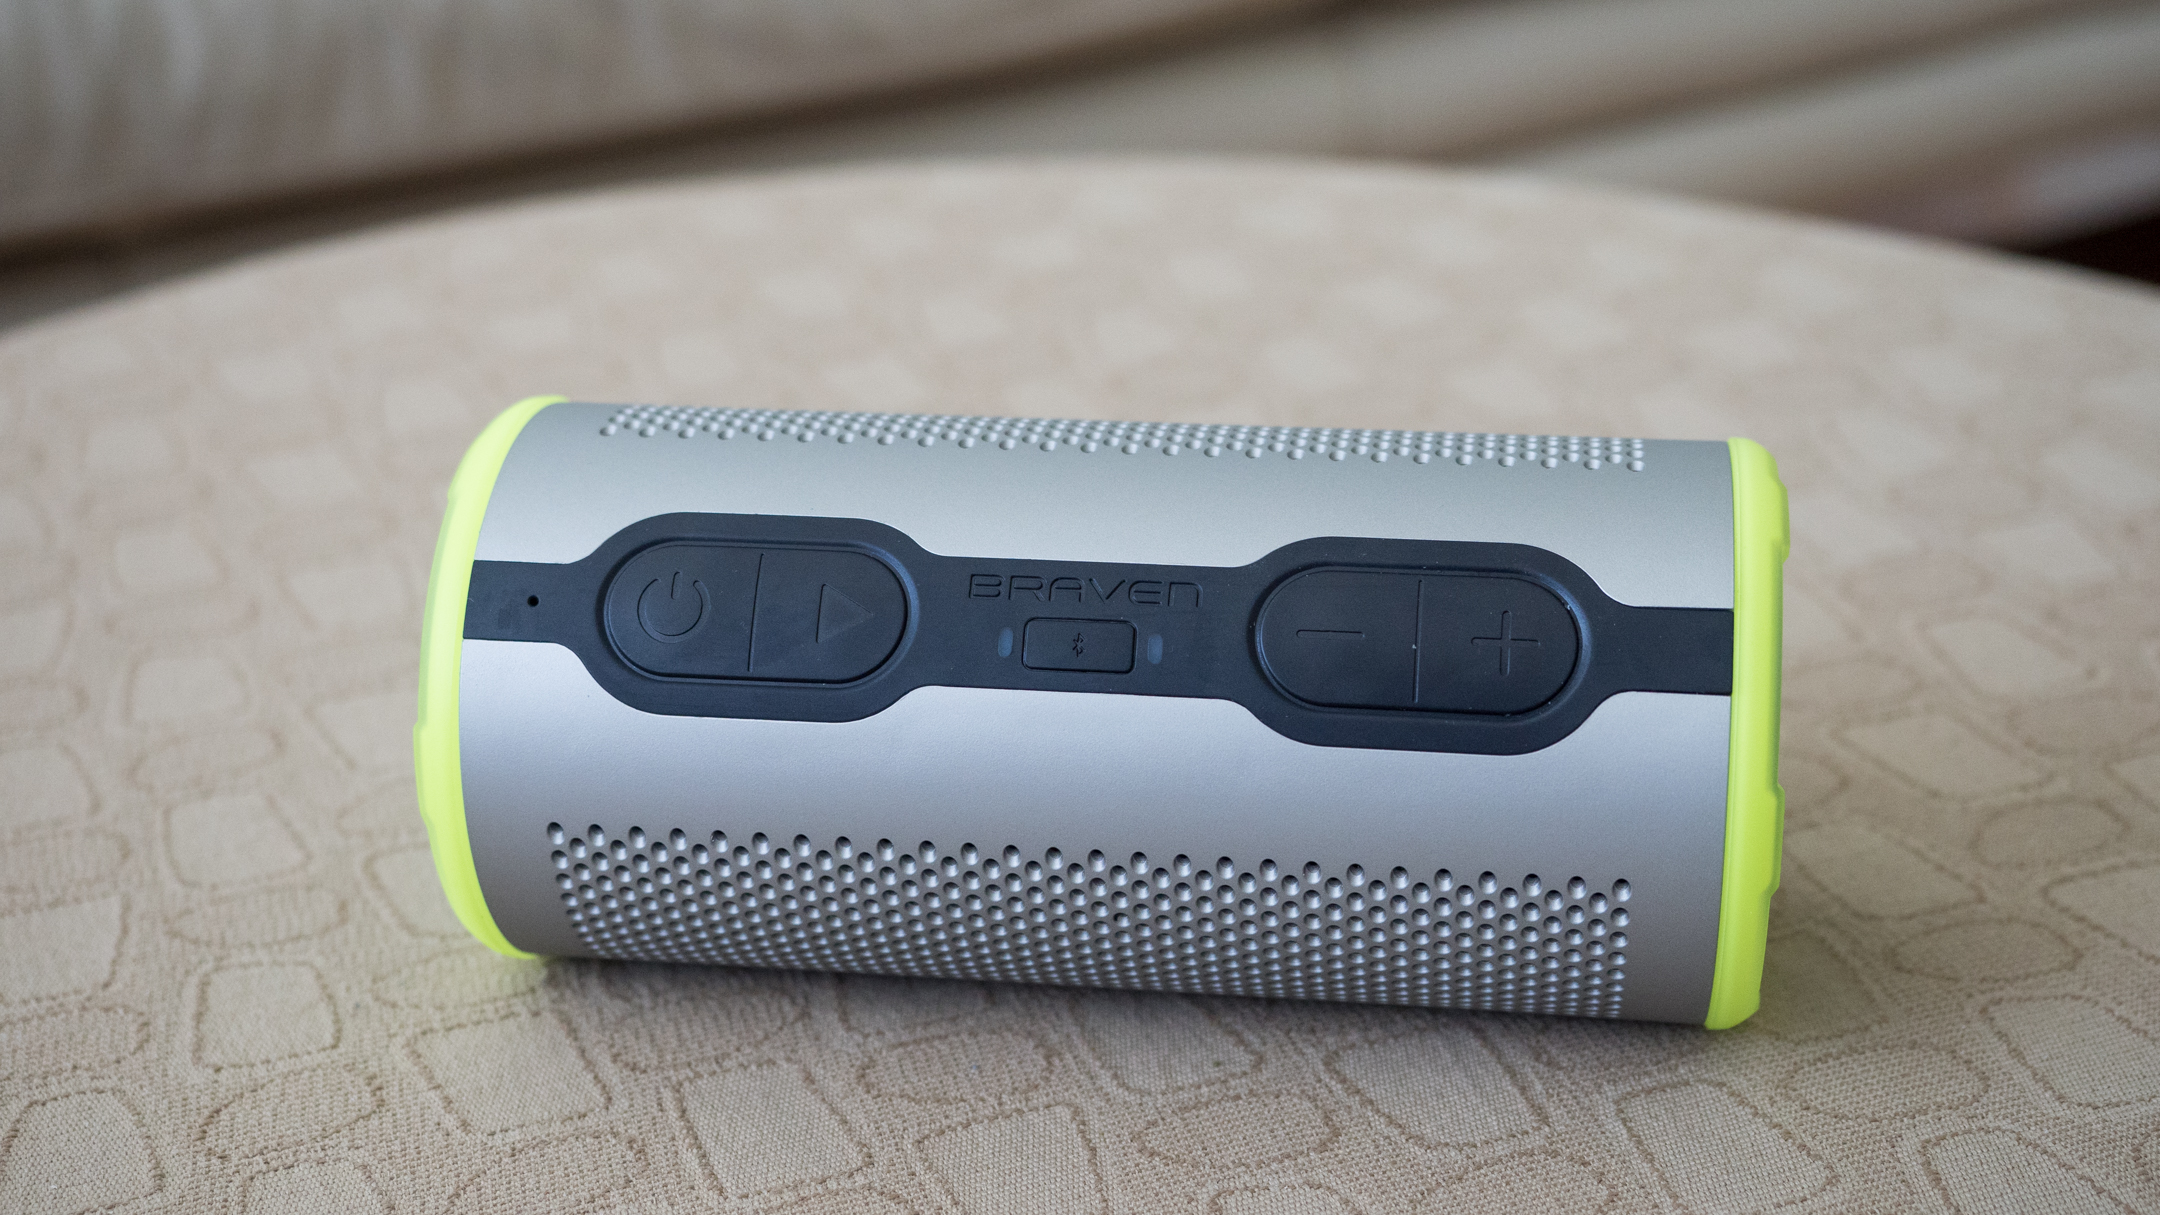 Braven Bluetooth speakers also charge your devices - CNET